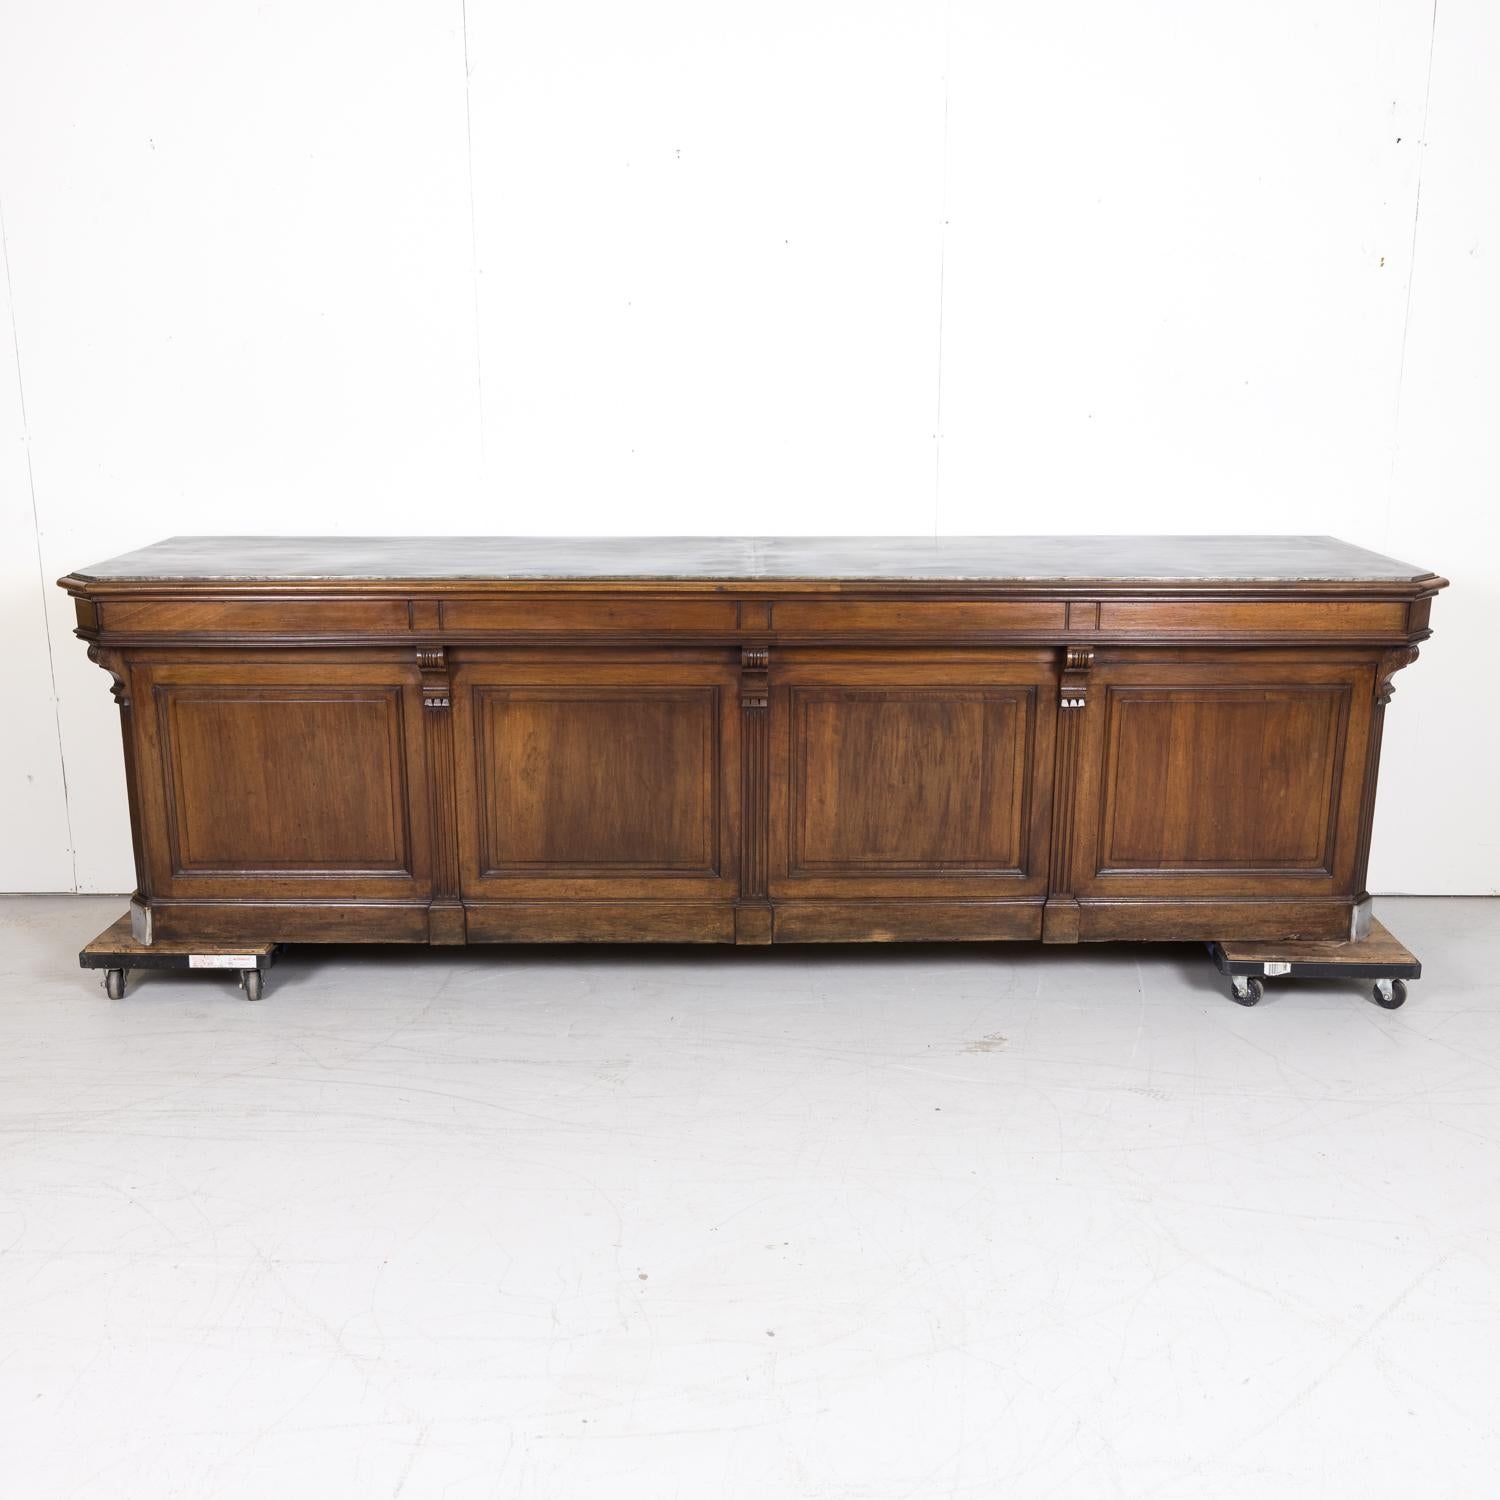 19th century French work counter handcrafted in Normandy of solid walnut with oak drawers, circa 1880s. This impressive counter, from a boutique in Deauville, a seaside resort on the Côte Fleurie, is a little over 10 feet long and features a newly